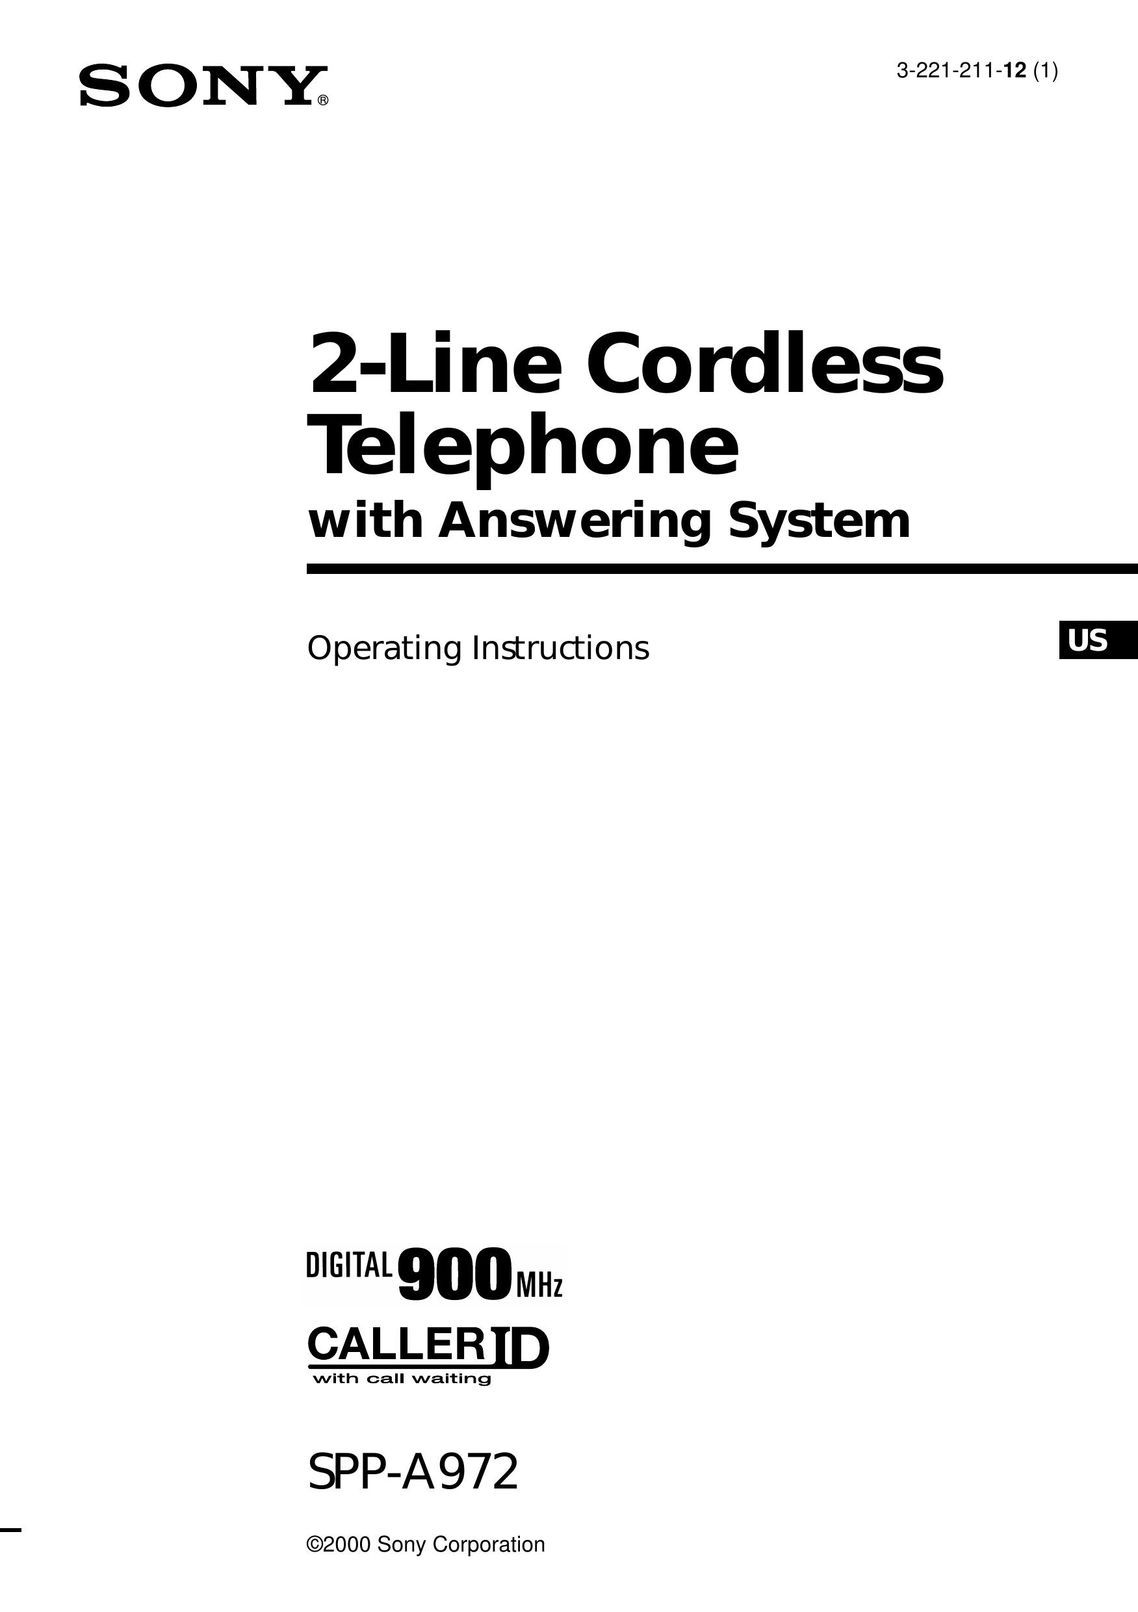 Sony SPP-A972 Cordless Telephone User Manual